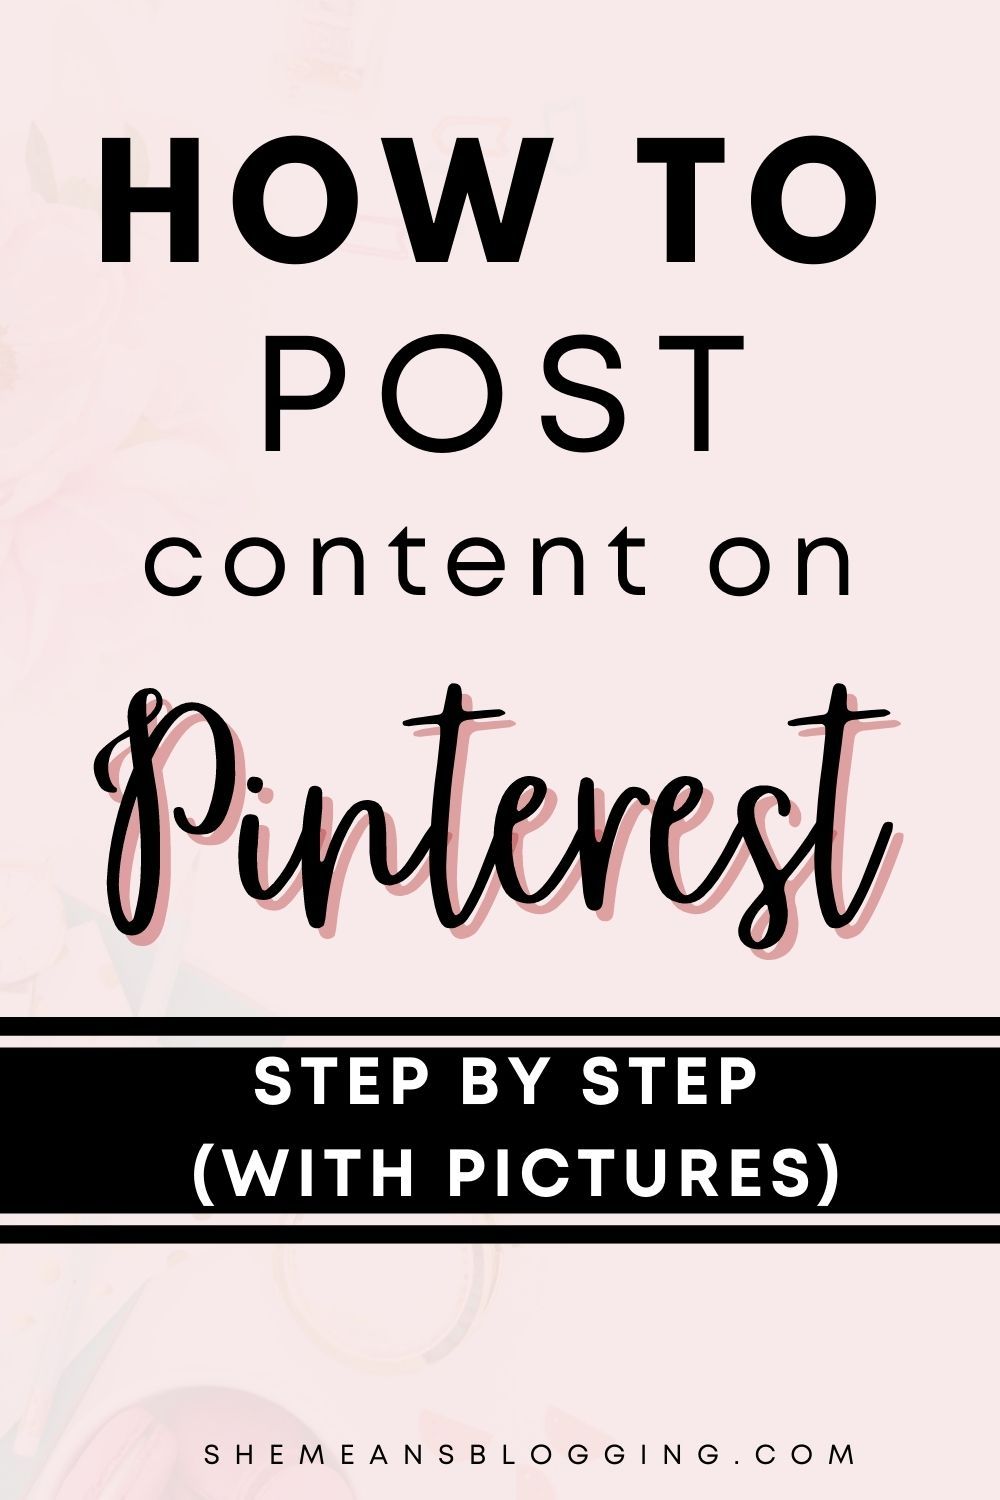 How to post content on Pinterest. Follow this step by step tutorial to upload photos on Pinterest. Add content to pinterest with this tutorial. Drive Pinterest traffic with publishing content on pinterest. Pinterest for beginners #pinterestmarketing